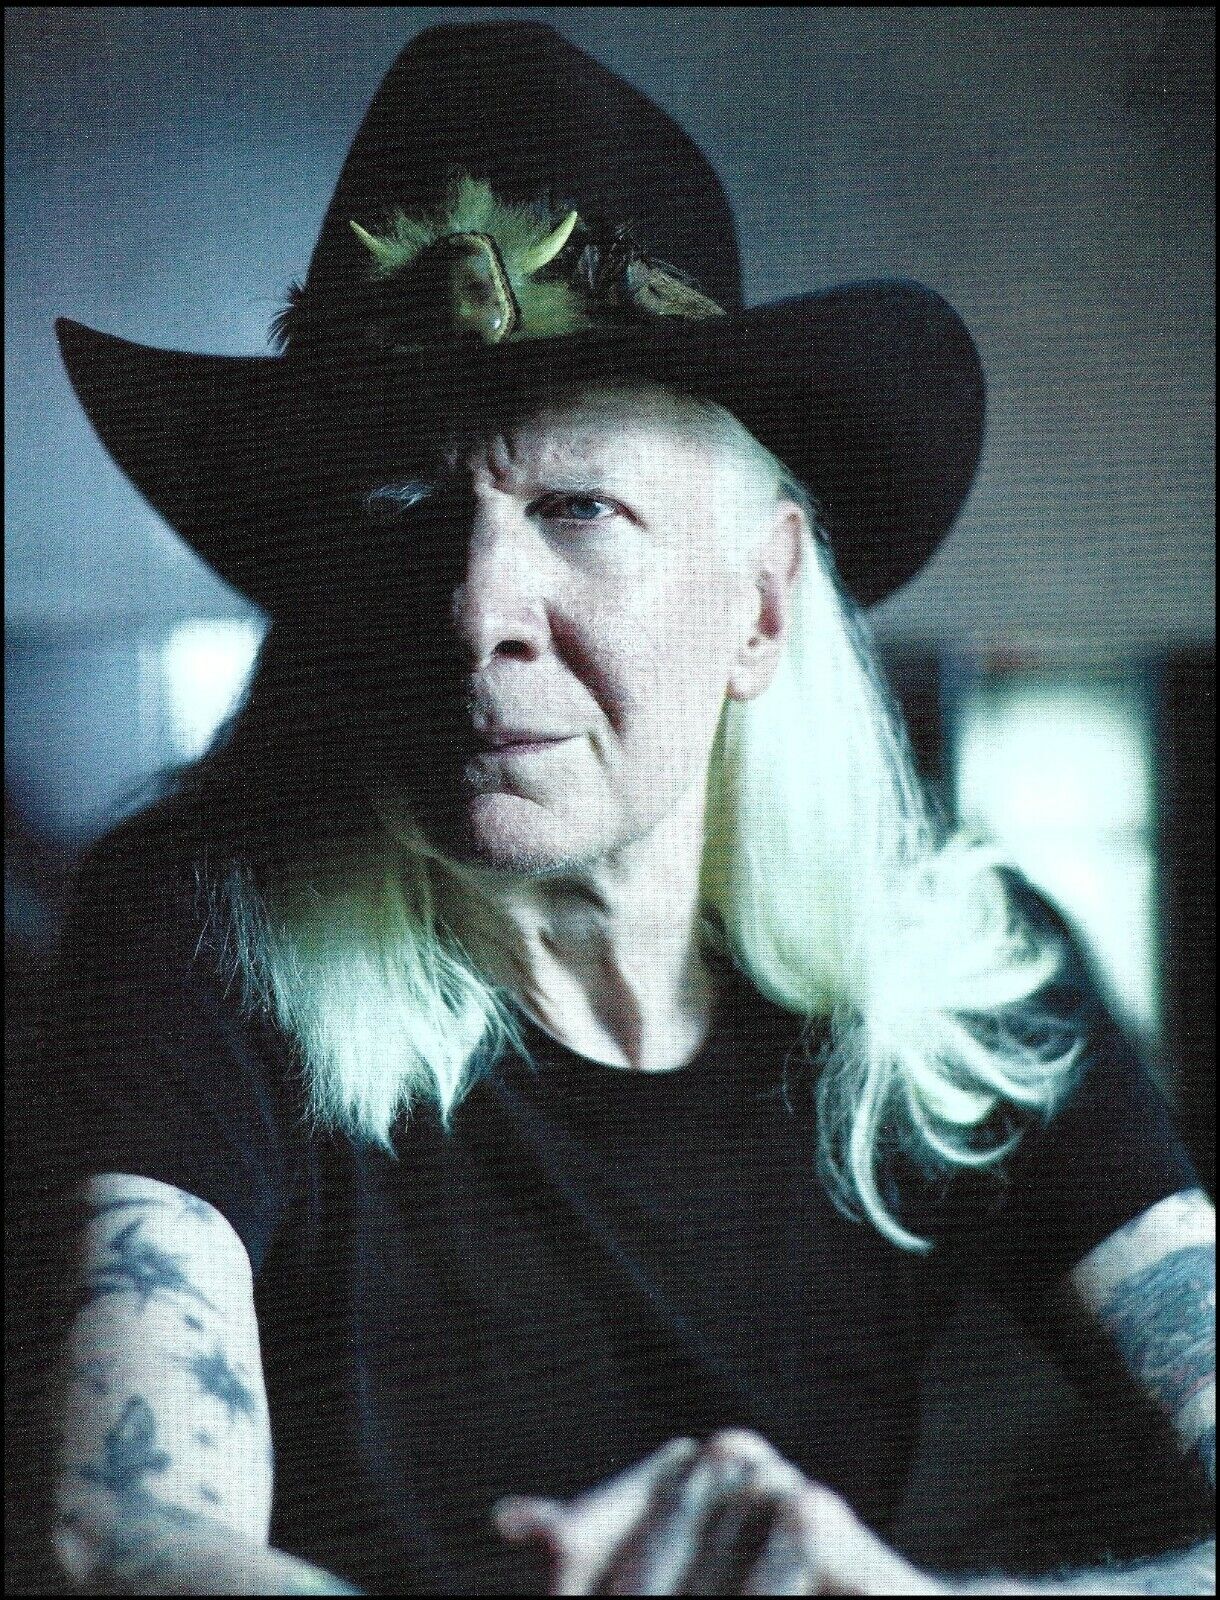 Johnny Winter 8 x 11 close-up pin-up photo 2012 full page color print